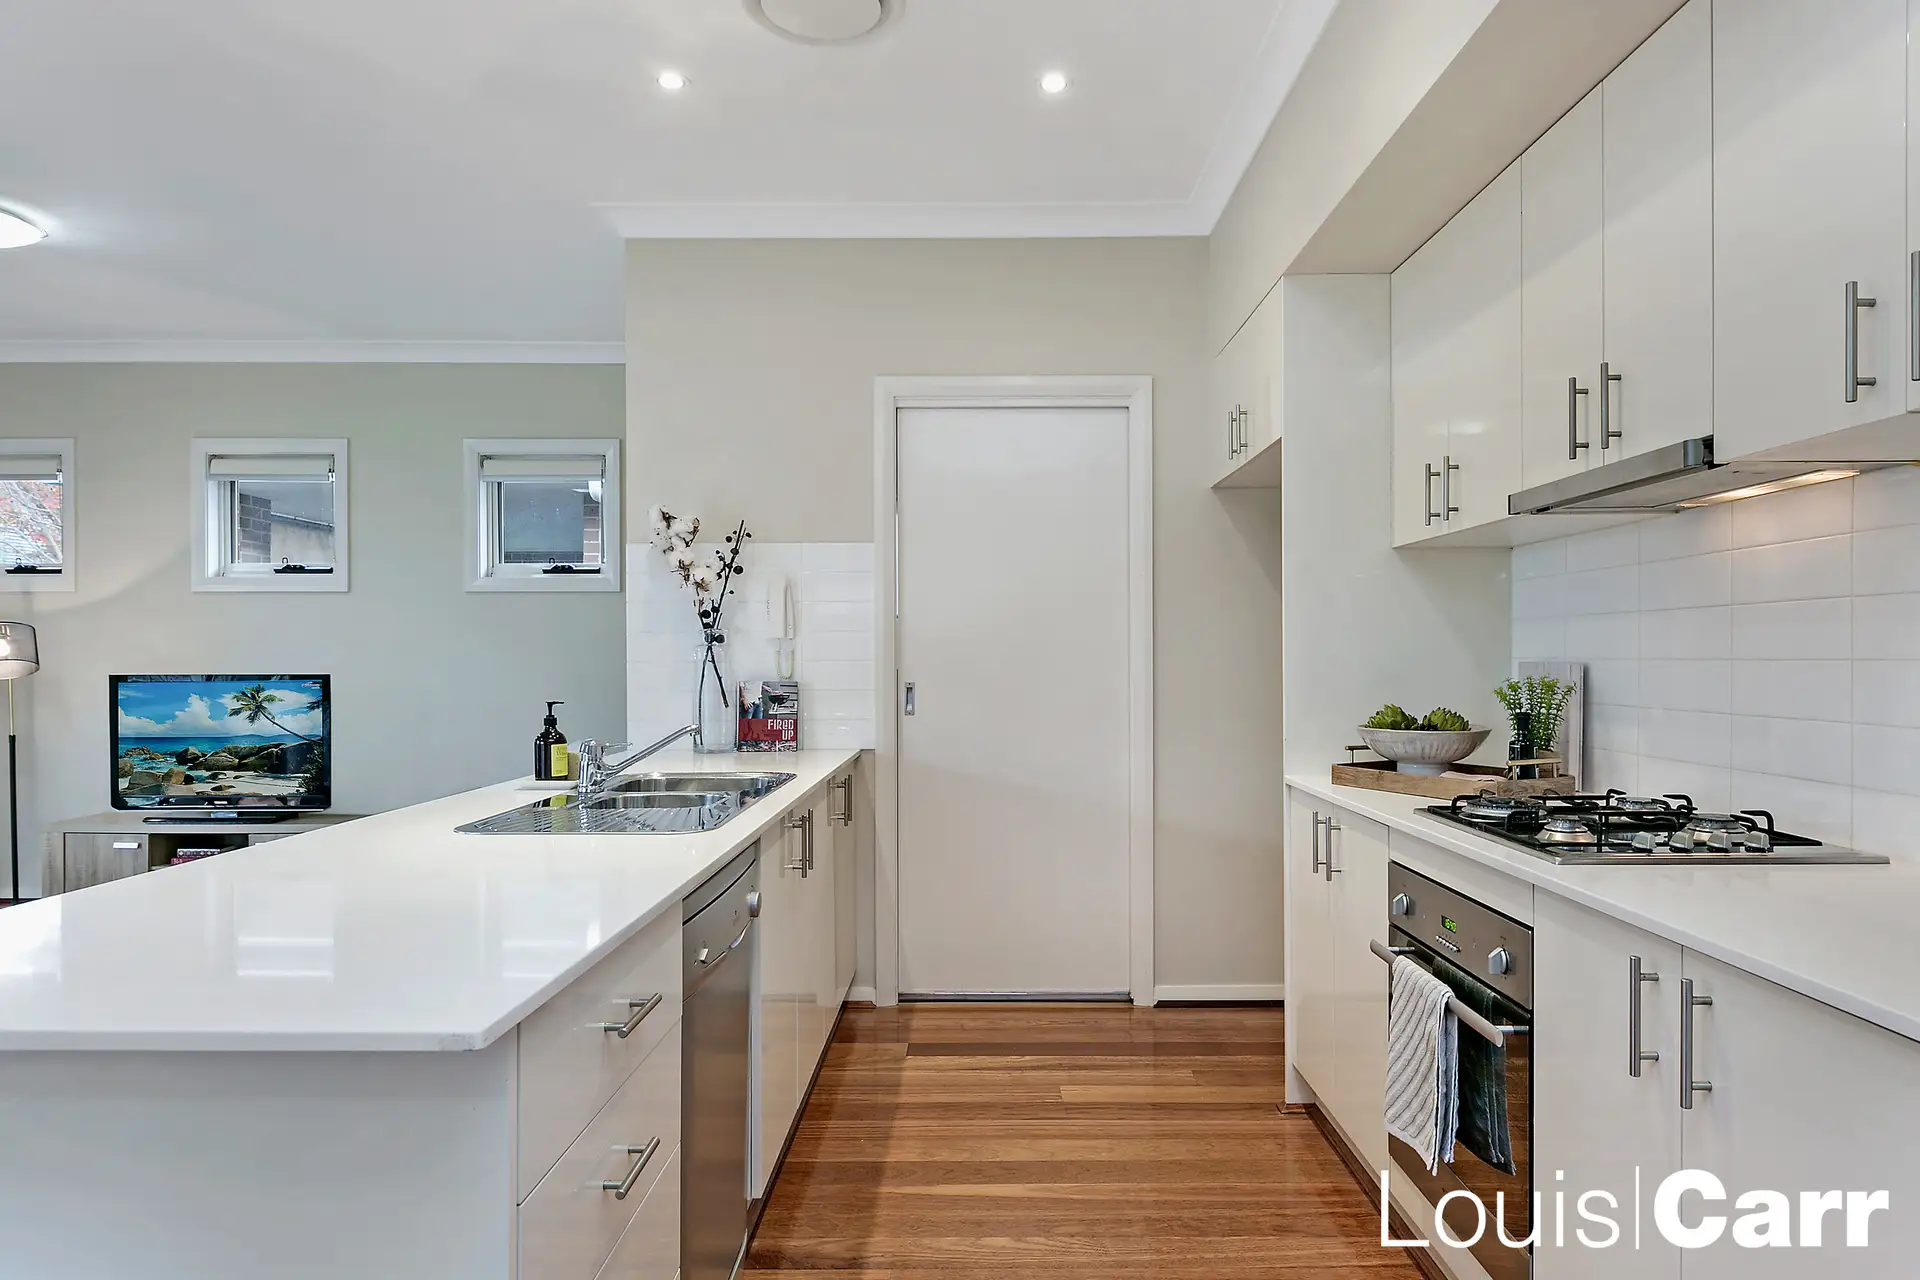 Photo #3: 7 Holly Street, Rouse Hill - Sold by Louis Carr Real Estate